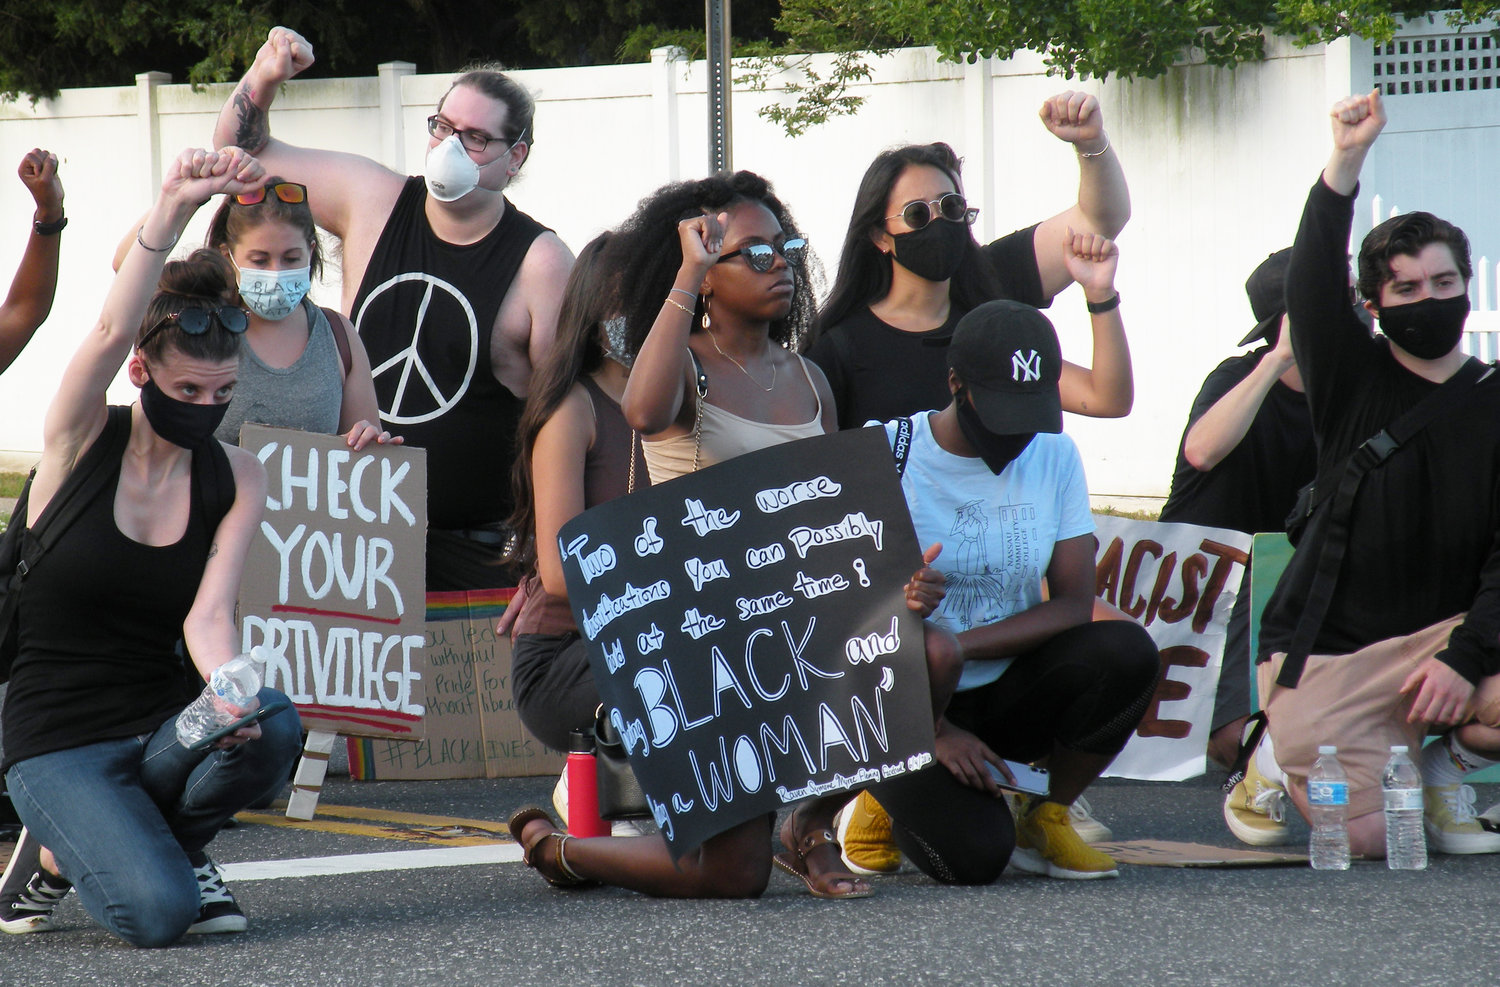 Protesters knelt to honor the Black Lives Matter movement last Saturday, as more than 100 marchers assembled and marched peacefully through Wantagh and Levittown.